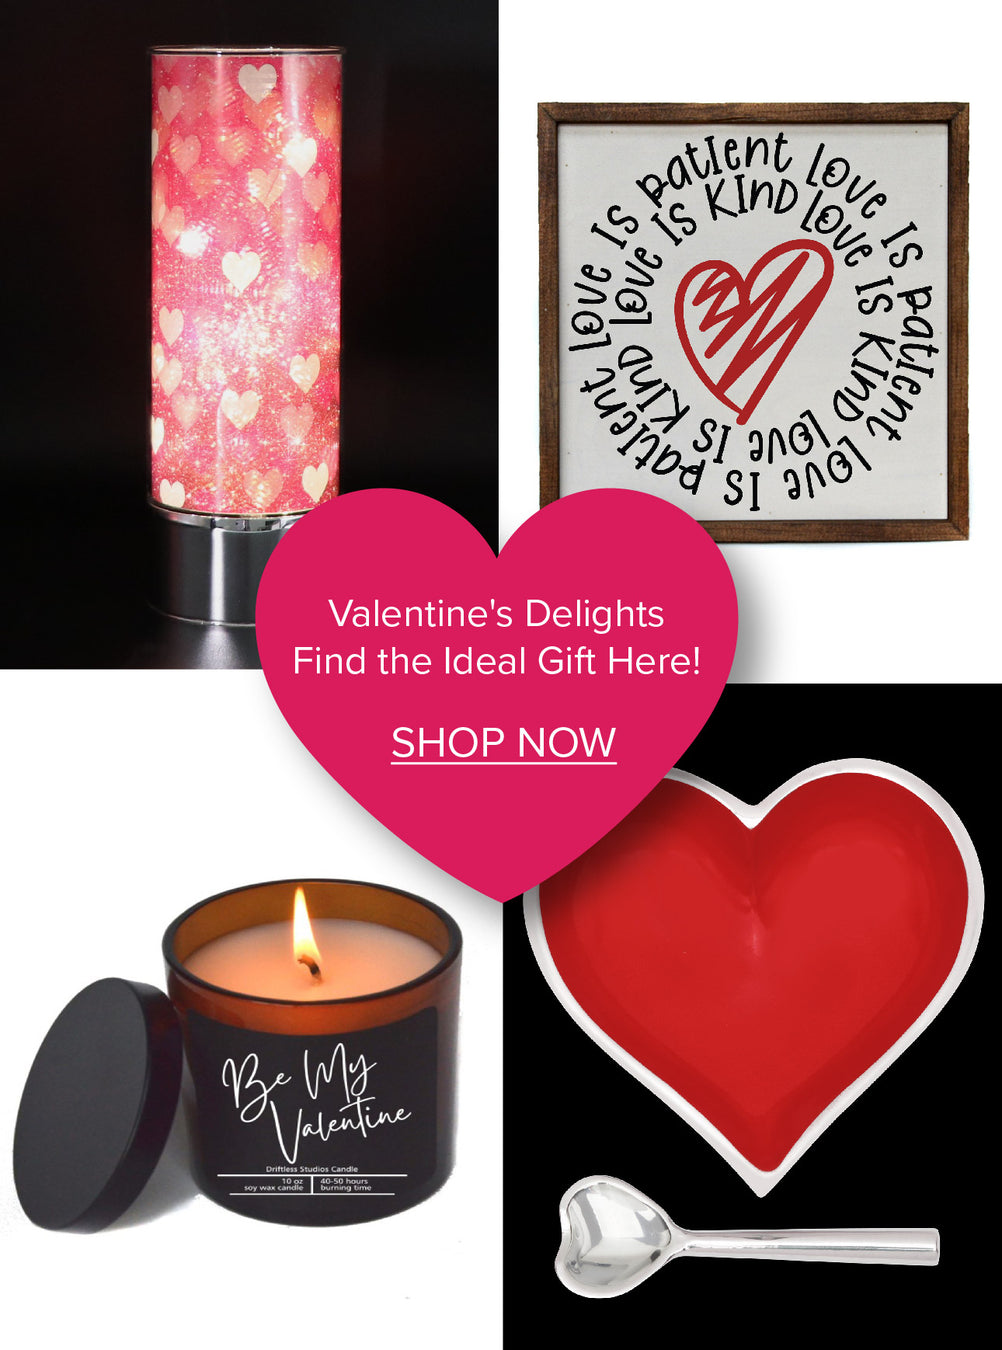 Valentine Candles Floating Heart Candles in Pink Red and White Scented in  Black Raspberry Vanilla Set of 3 